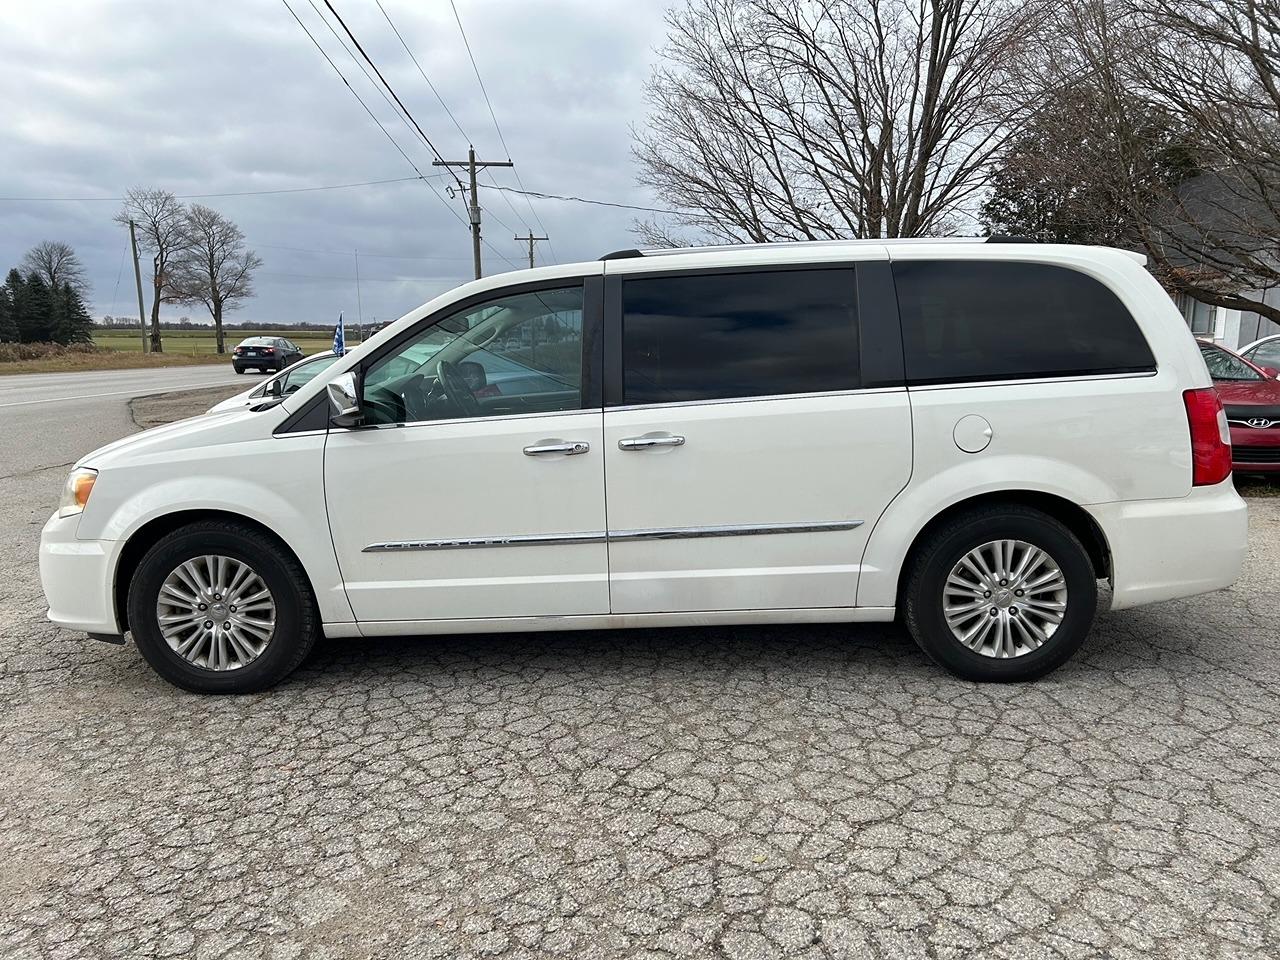 2012 Chrysler Town & Country Ltd*Runs&Drive Great*7 Pass*226 Kms*No Accidents* - Photo #8